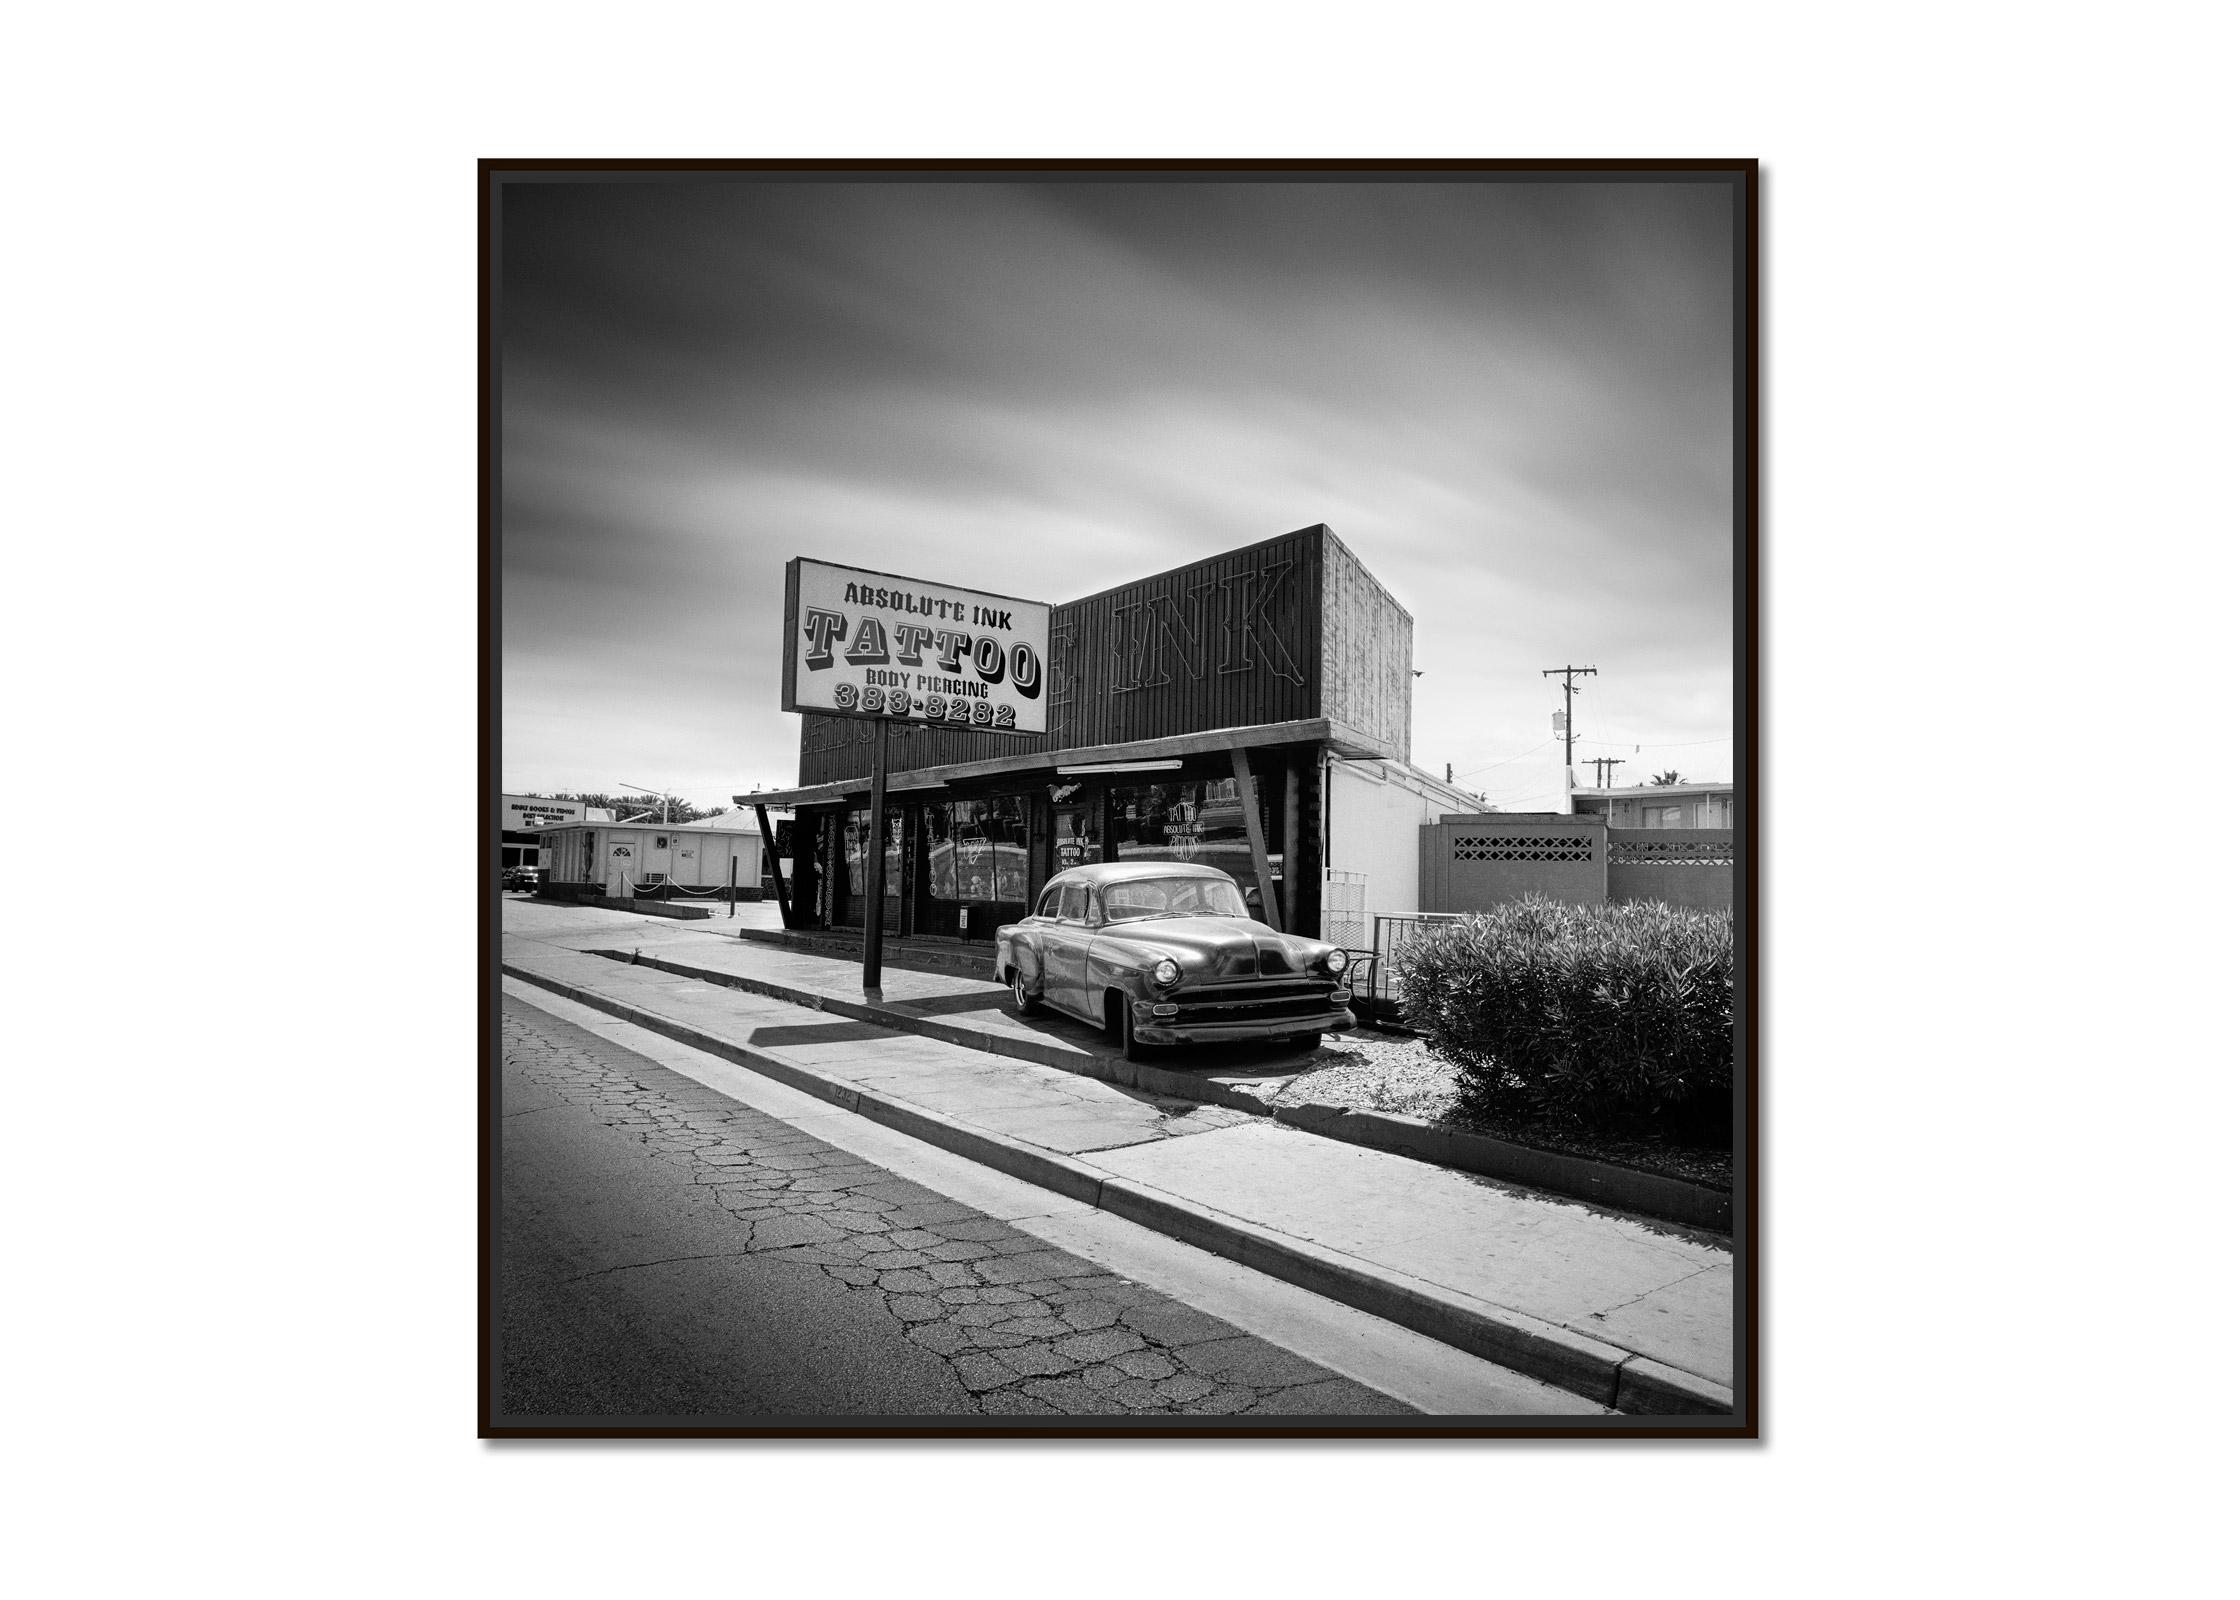 Absolute Ink Tattoo, Las Vegas, black and white, fine art photography, landscape - Photograph by Gerald Berghammer